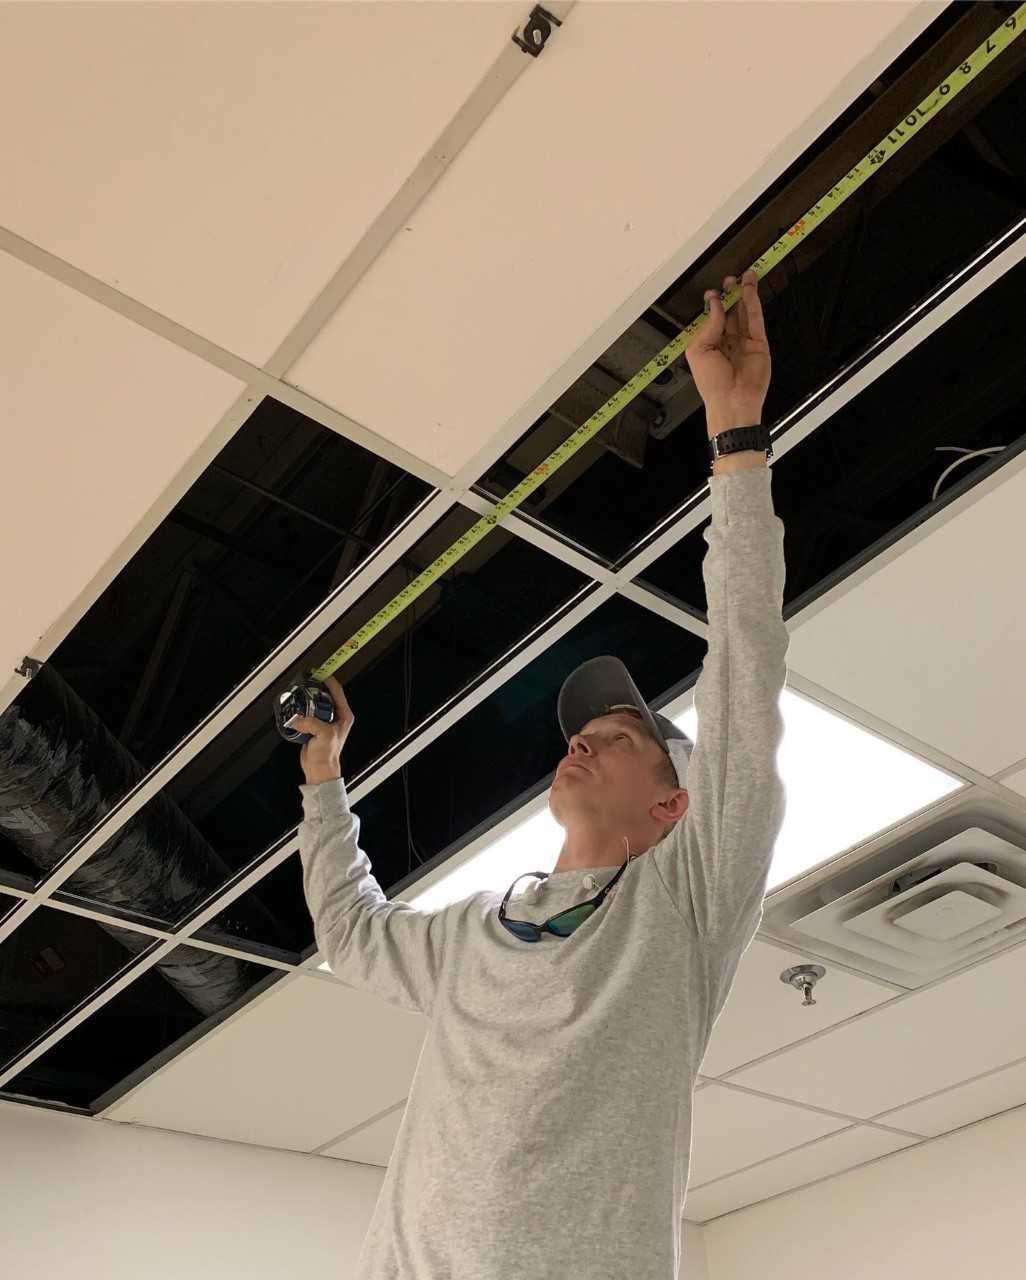 Maestro employee Dustin Kennedy repairing a ceiling for a client. Photo courtesy of Maestro Maintenance Management